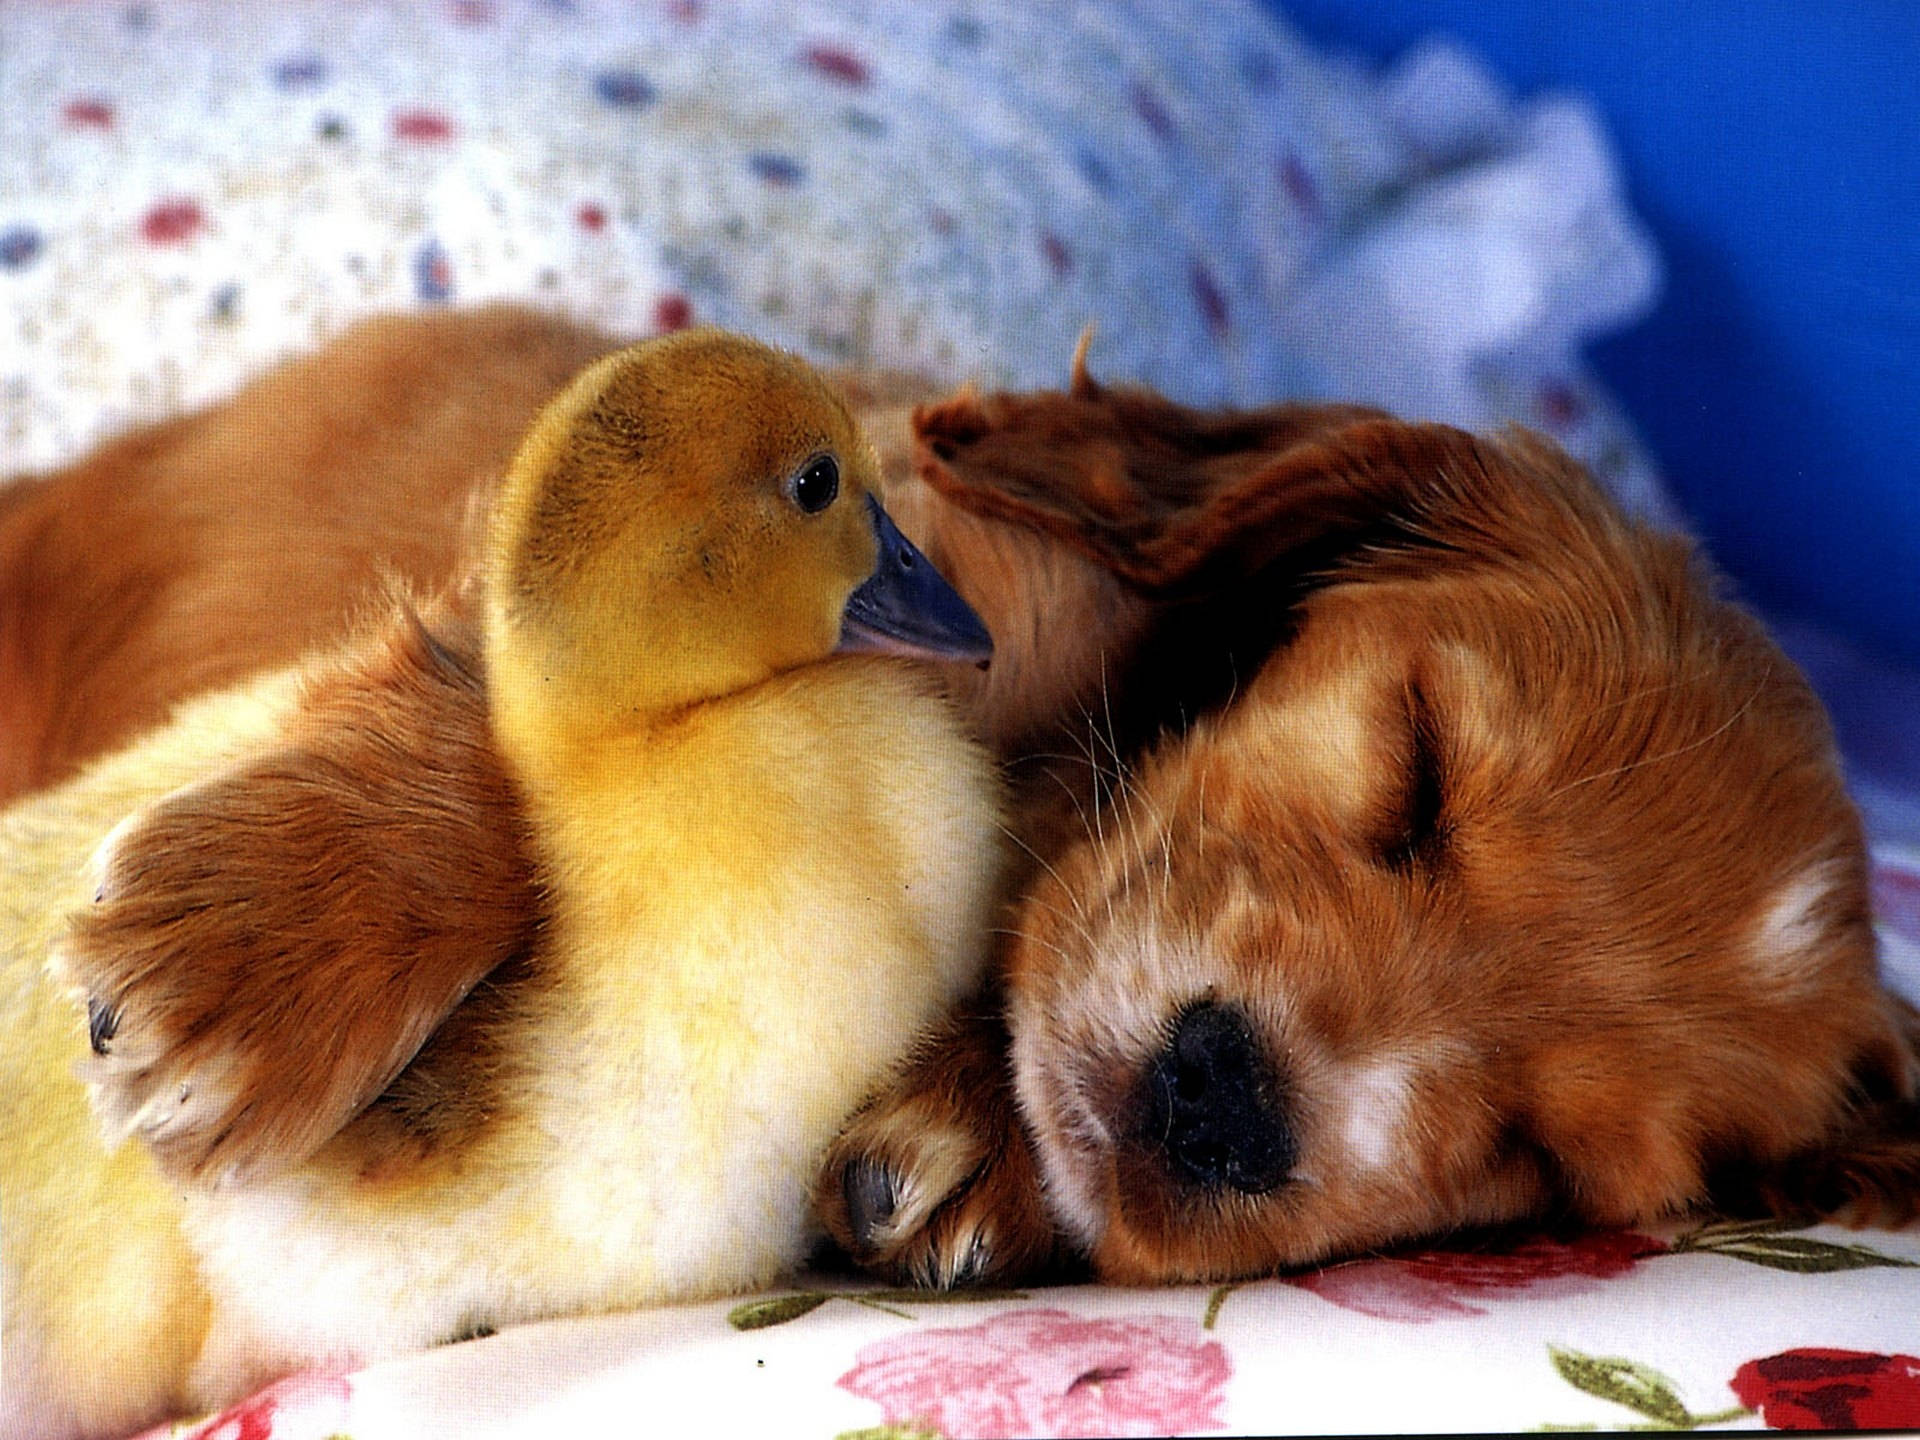 Sleeping Puppy And A Duckling Wallpaper